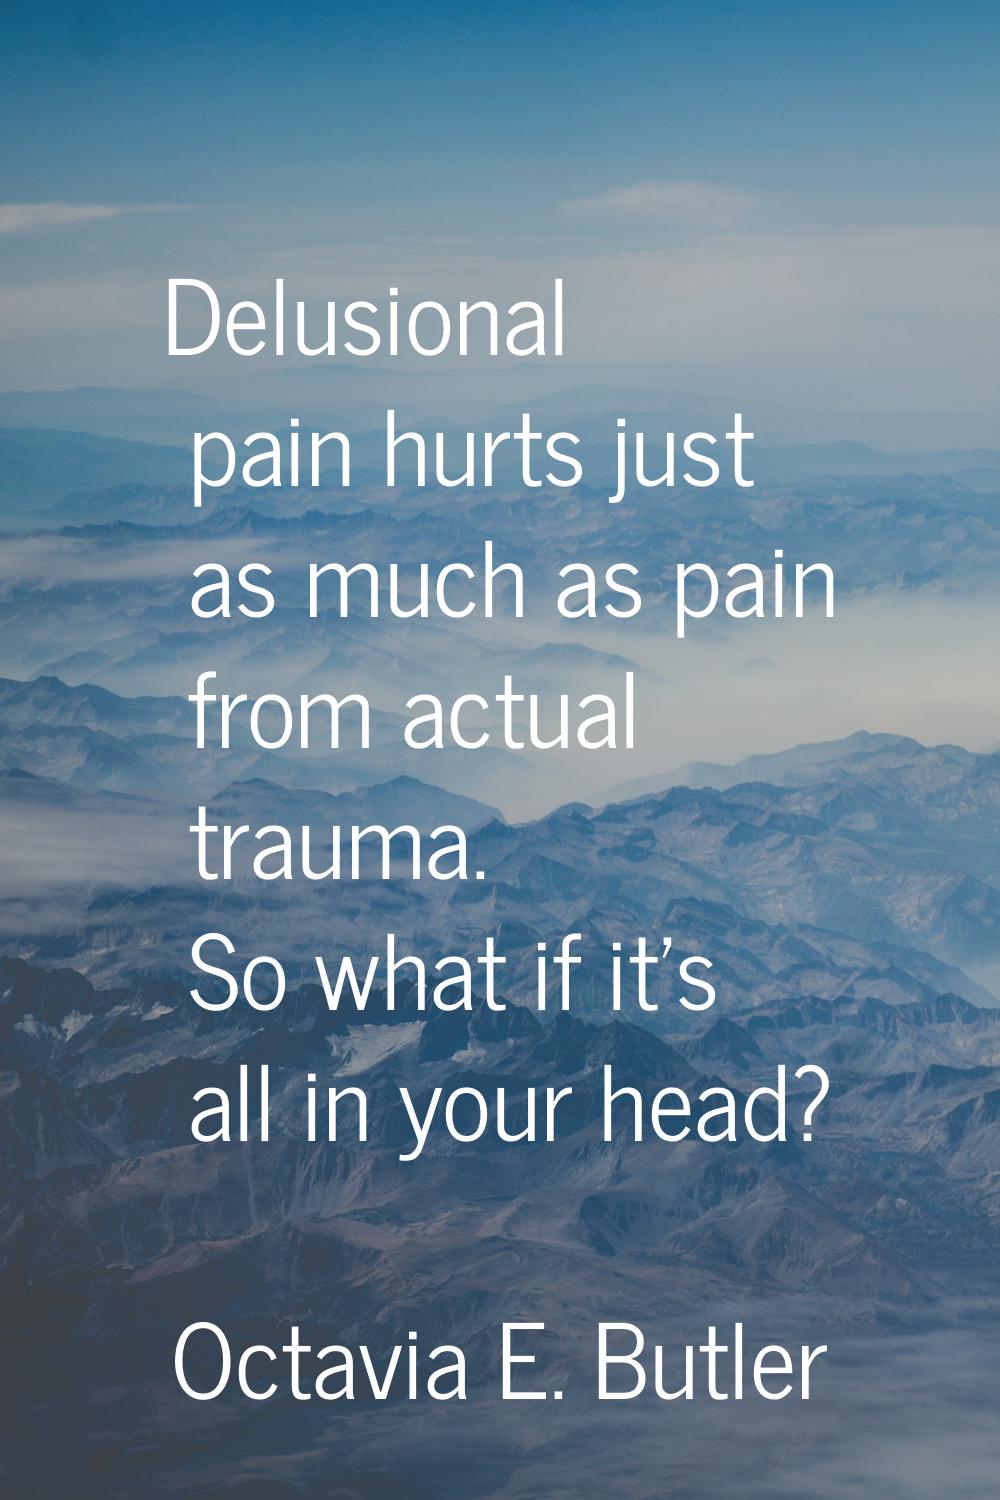 Delusional pain hurts just as much as pain from actual trauma. So what if it's all in your head?